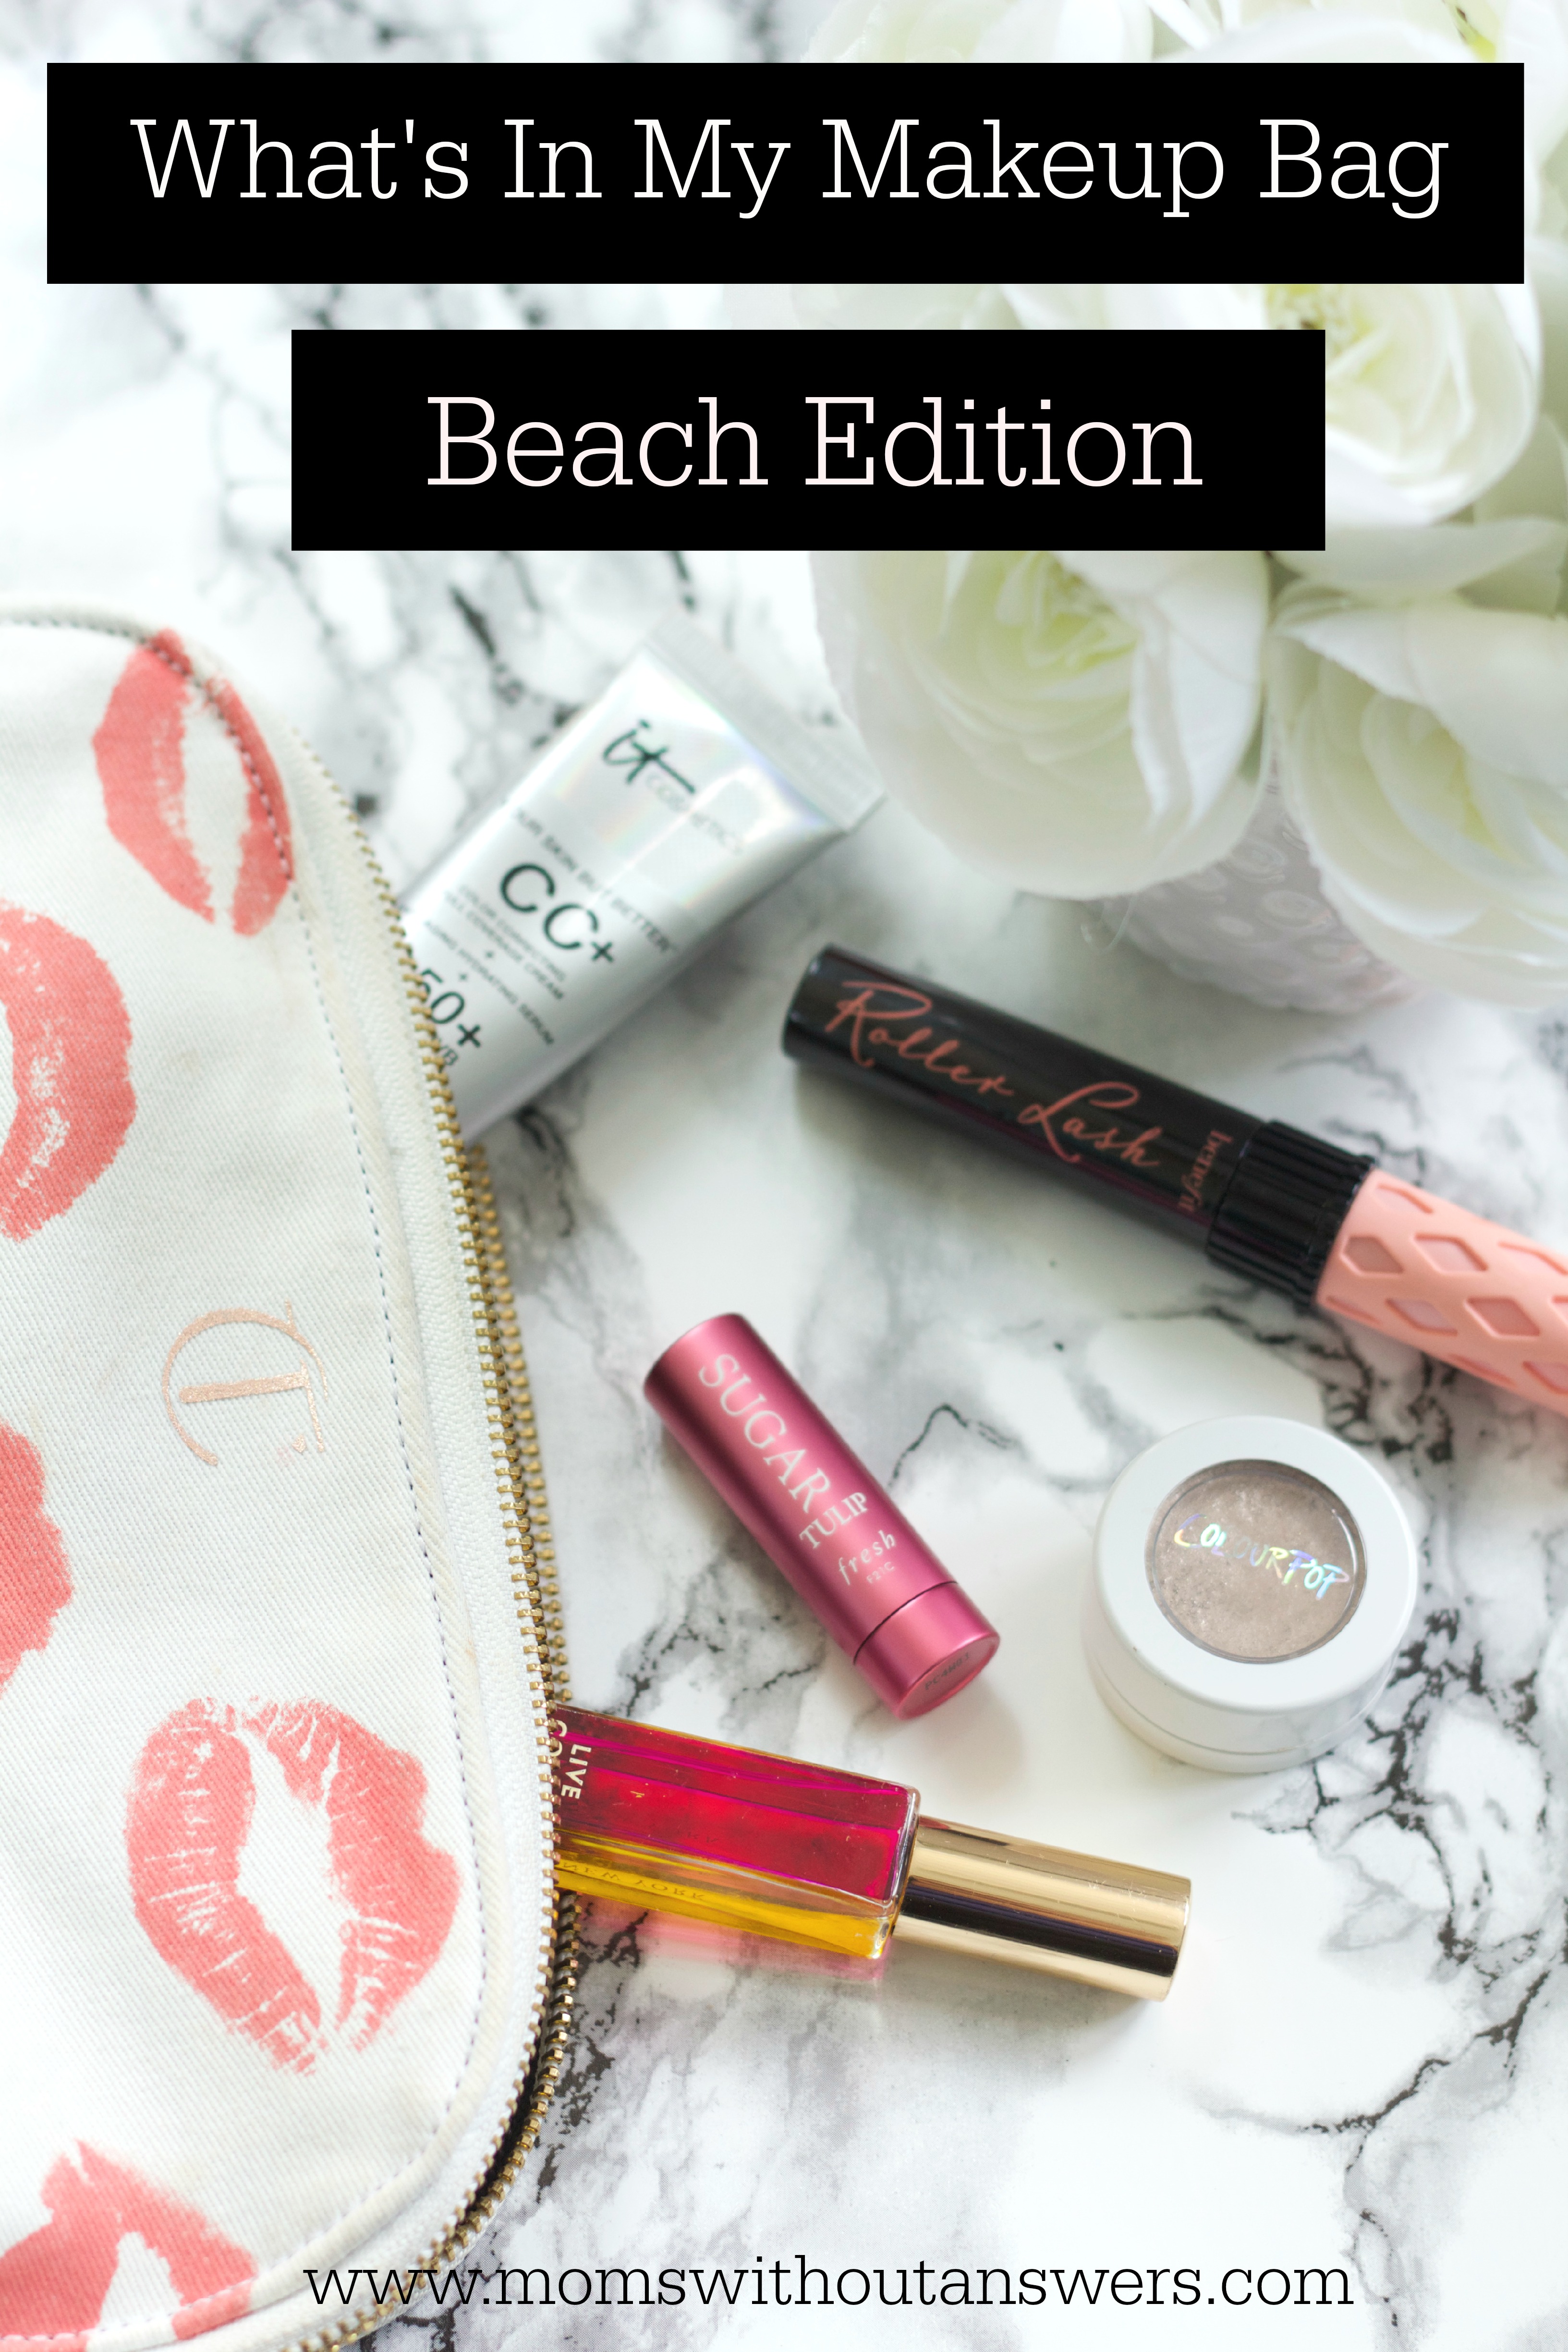 What’s In My Makeup Bag: Beach Edition